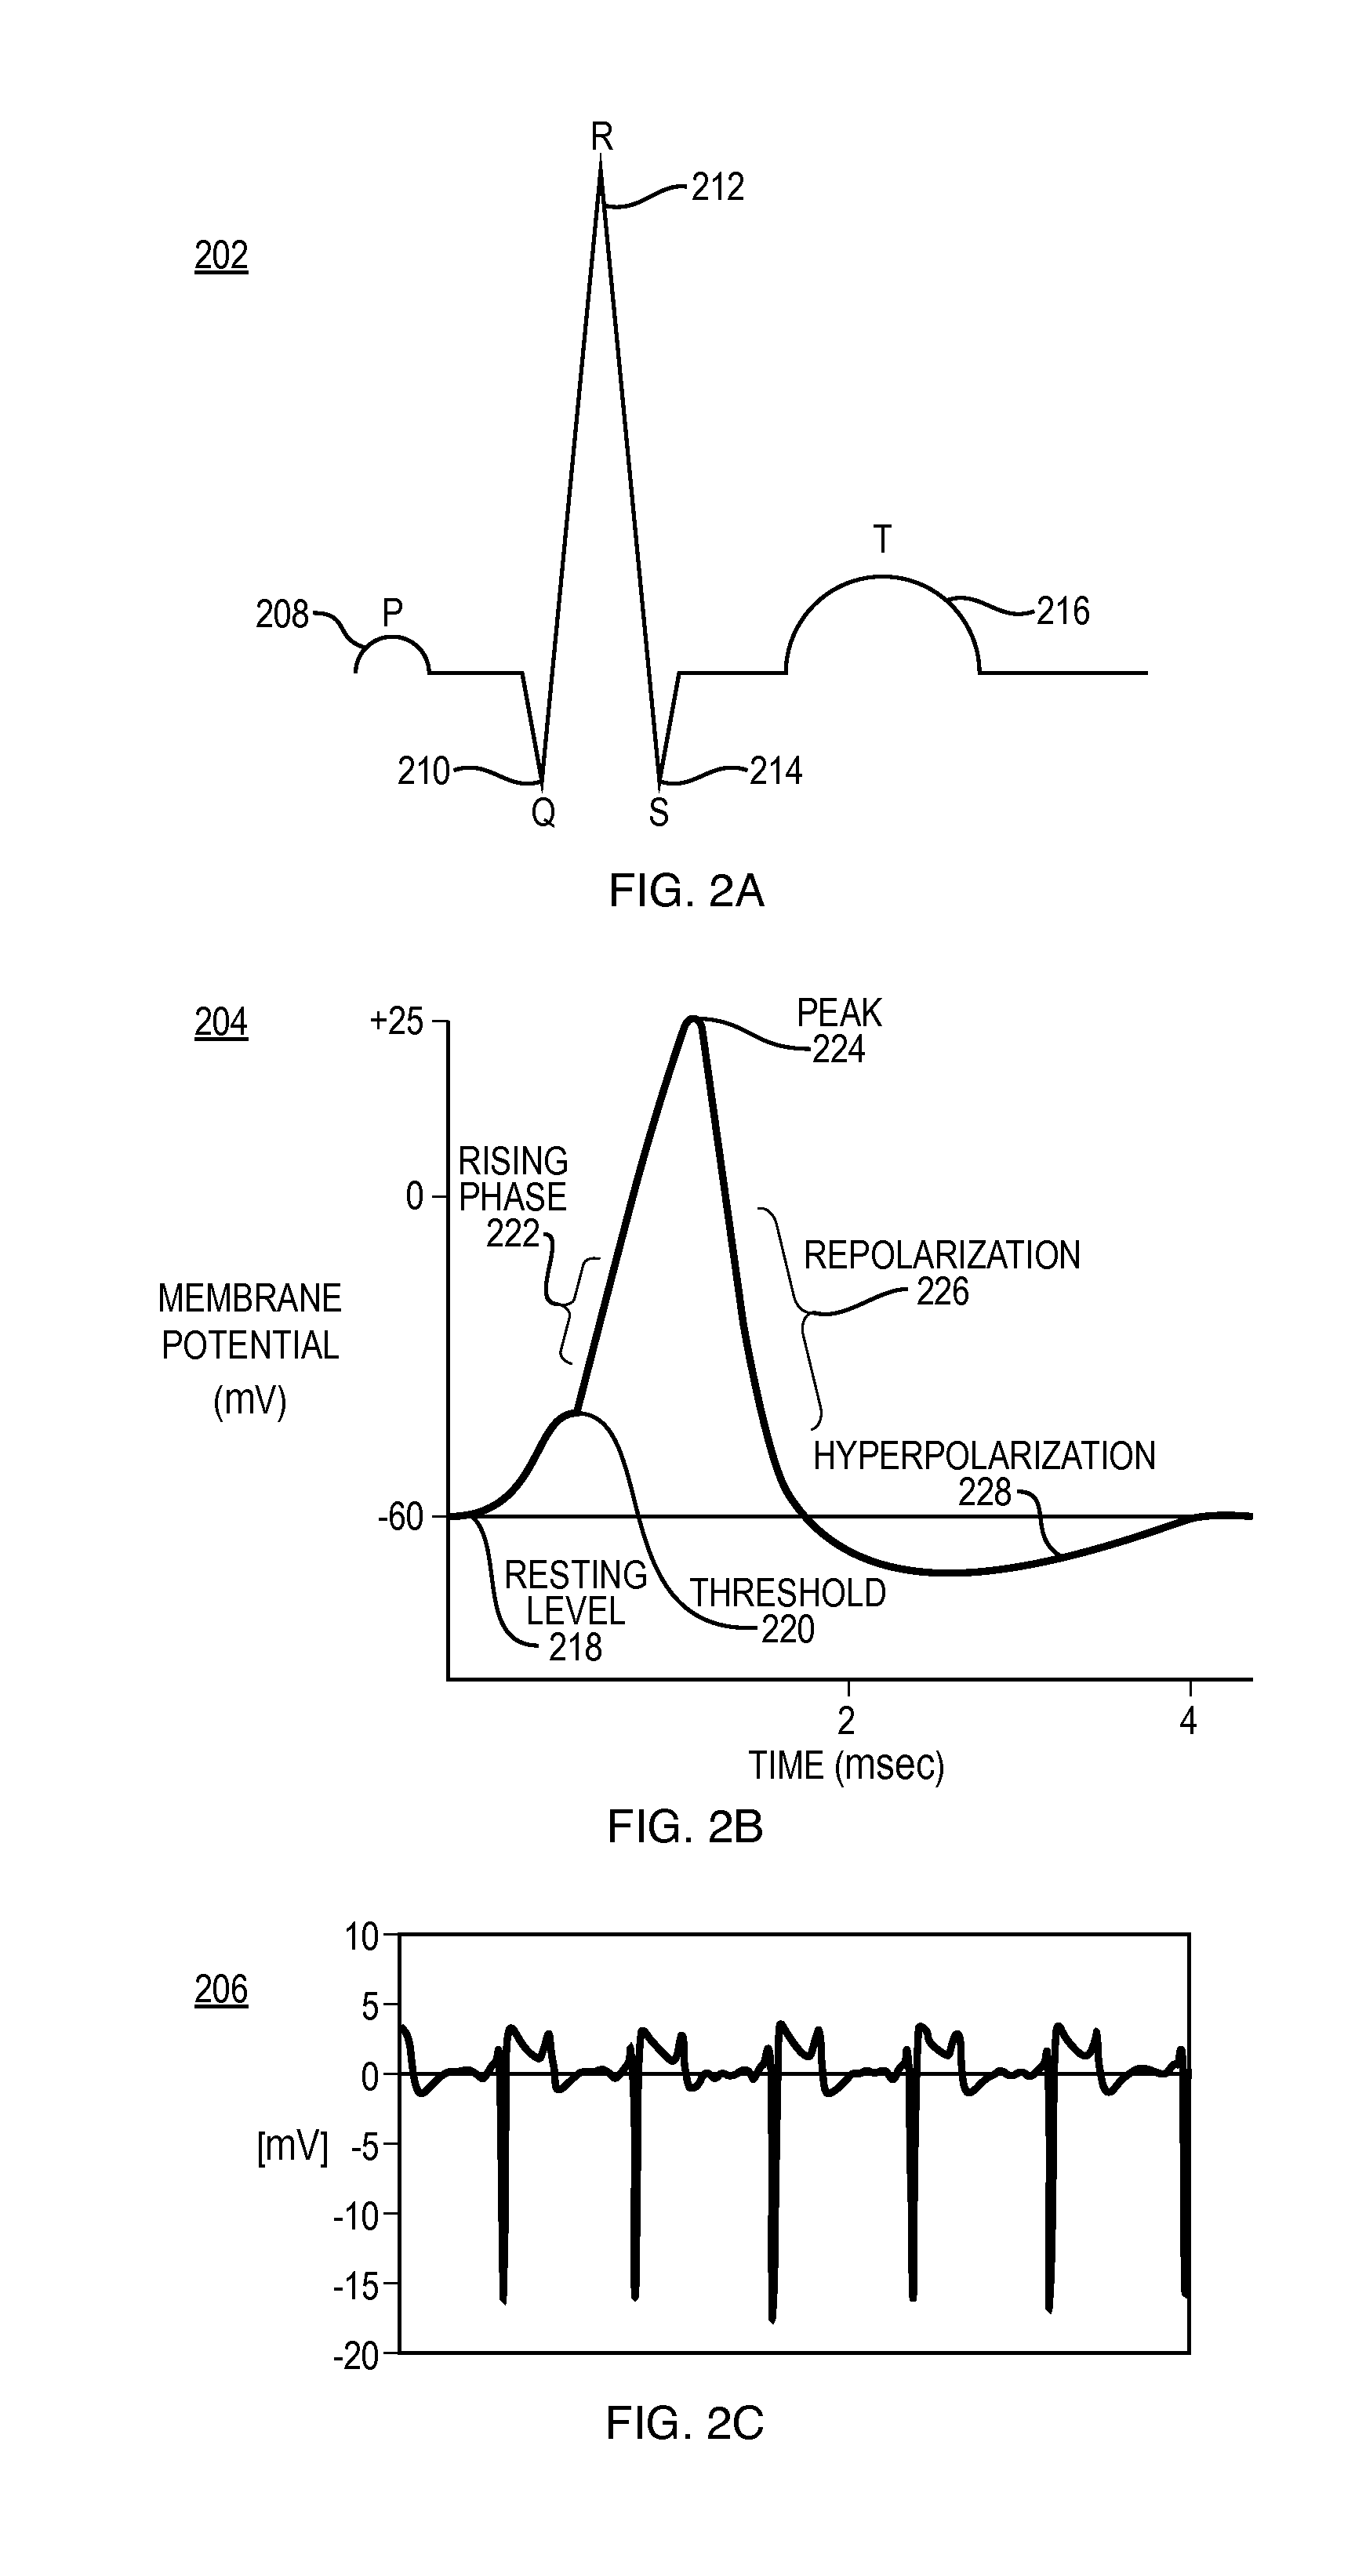 Systems and Methods for Heart and Activity Monitoring